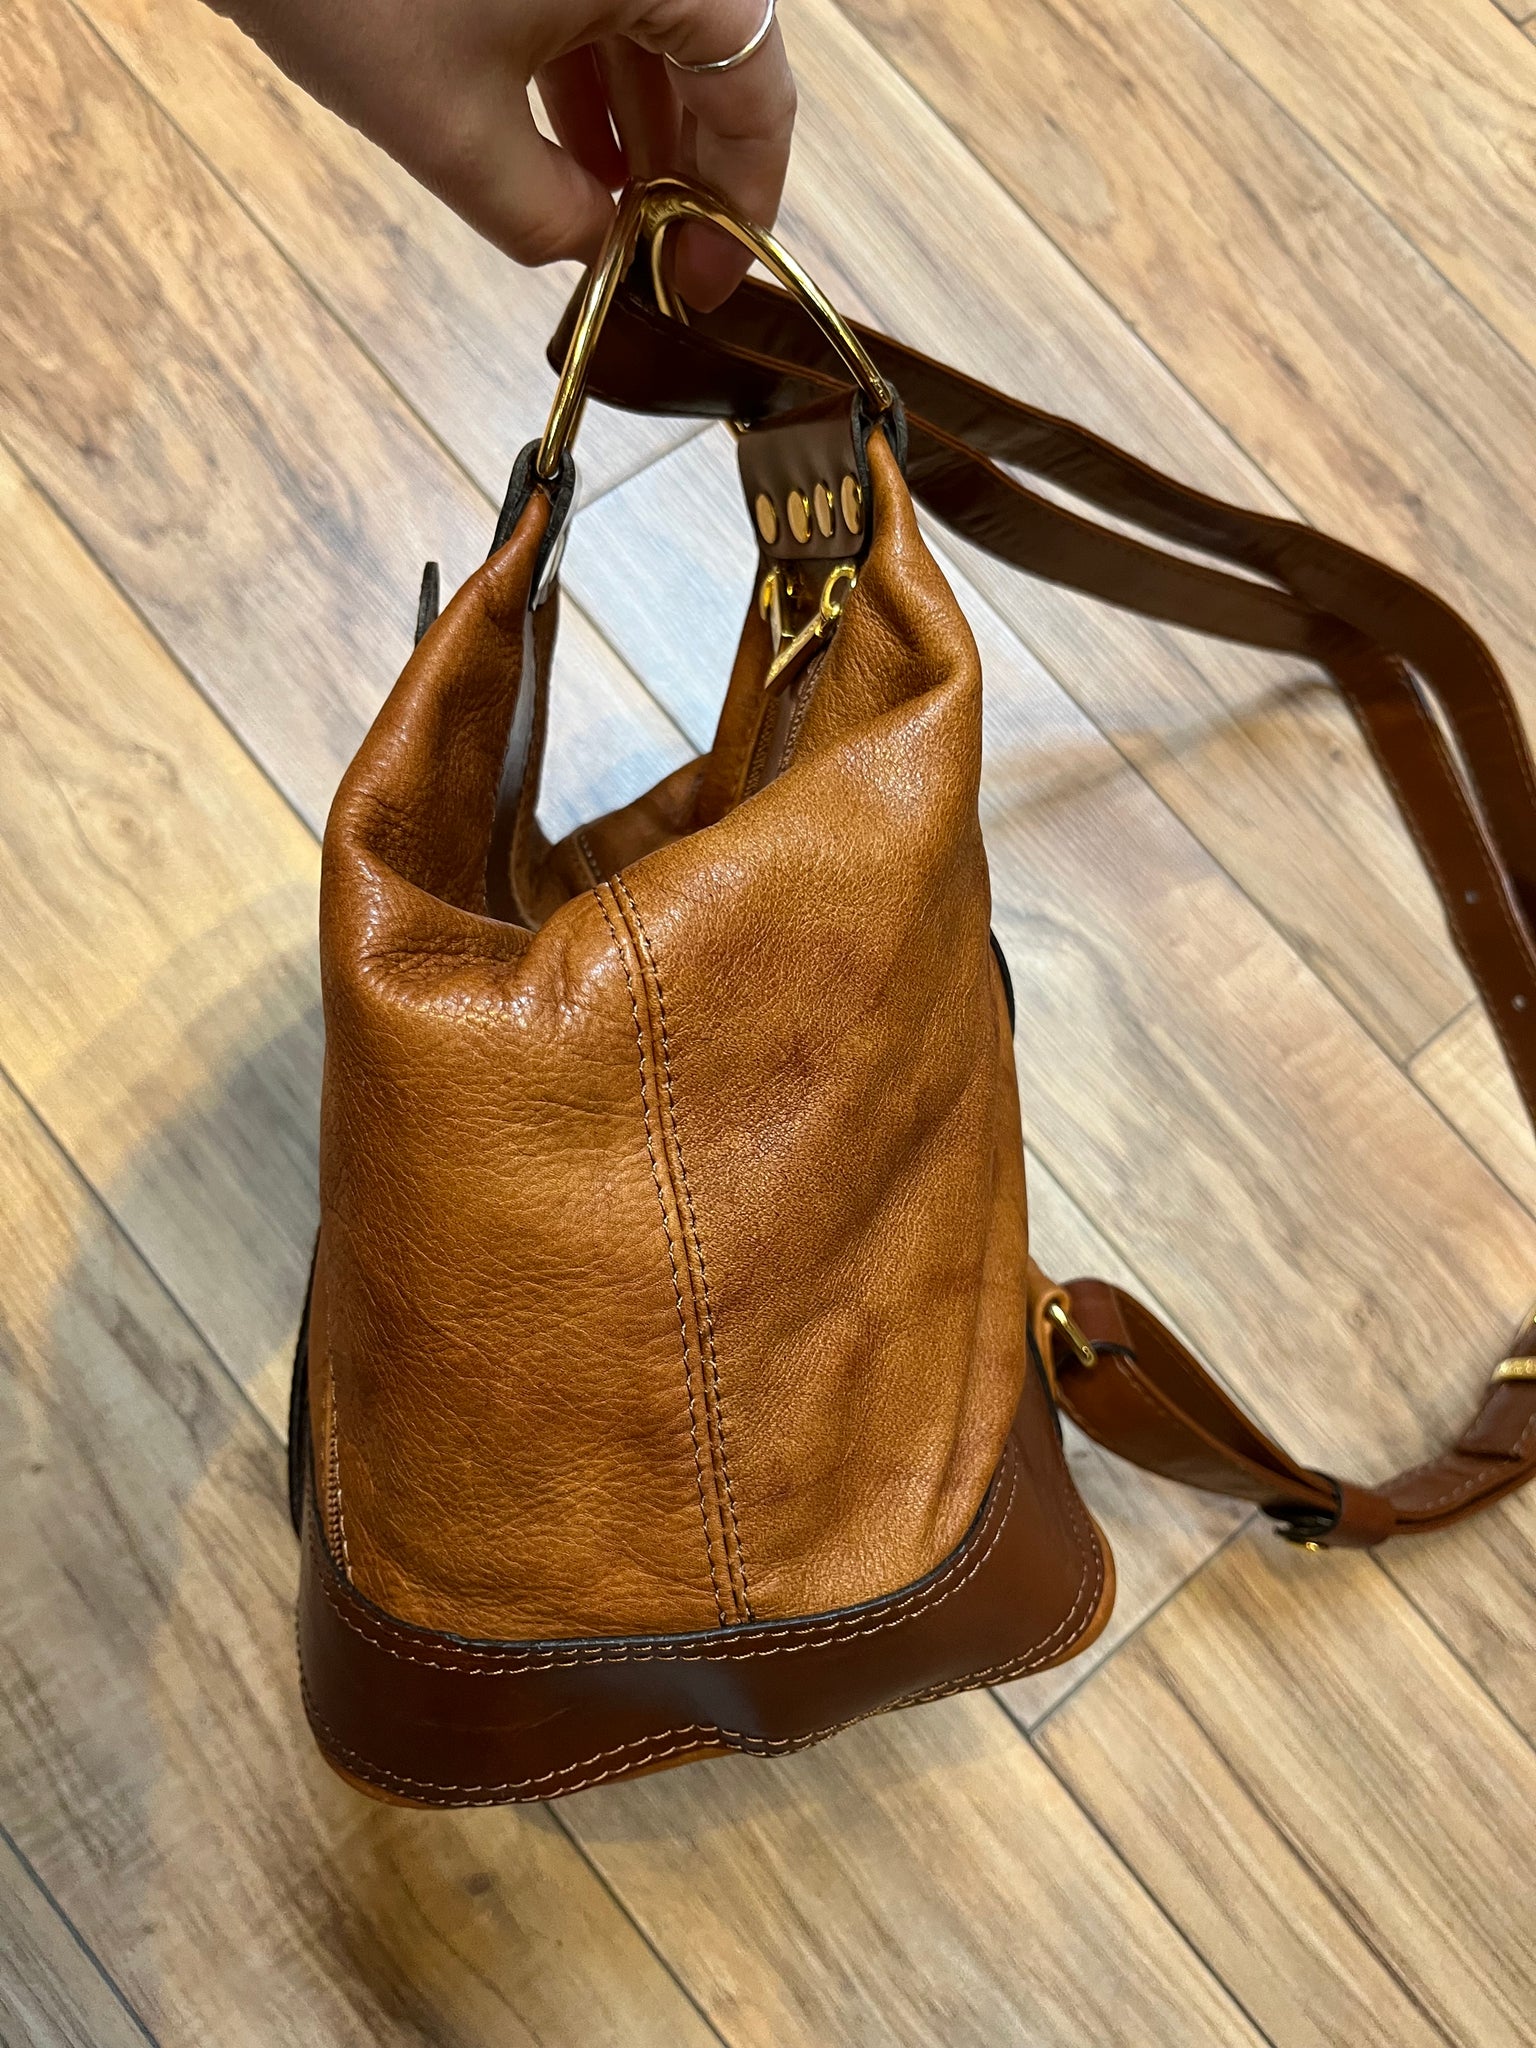 Valentino Di Paolo Leather Bucket Bag/ Knapsack, Made in Italy – KingsPIER